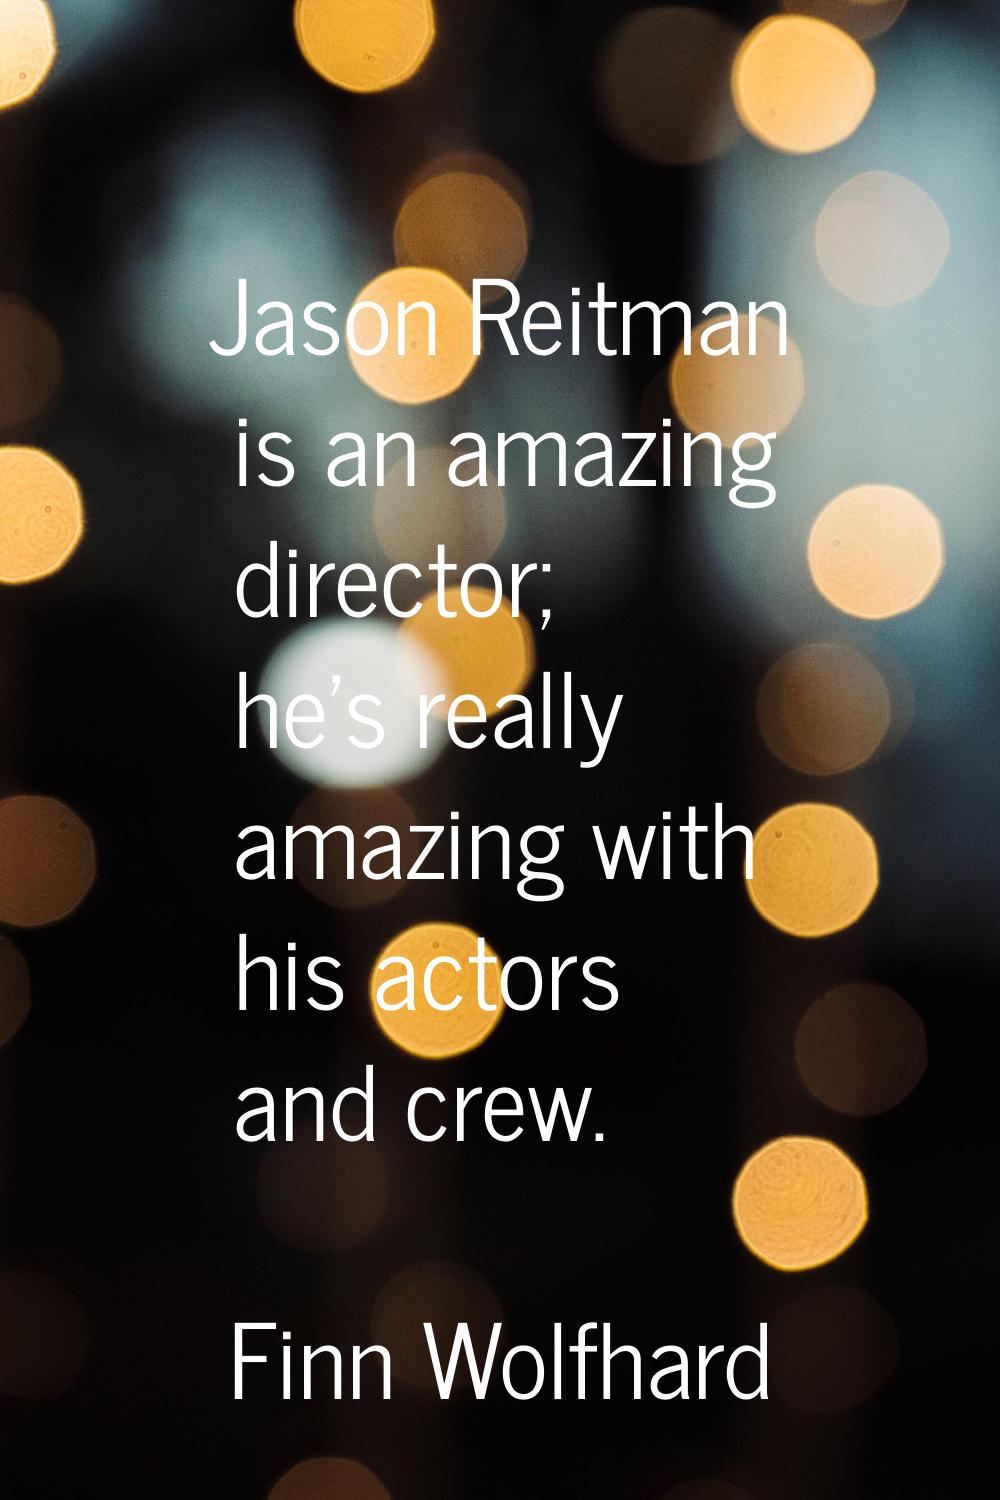 Jason Reitman is an amazing director; he's really amazing with his actors and crew.